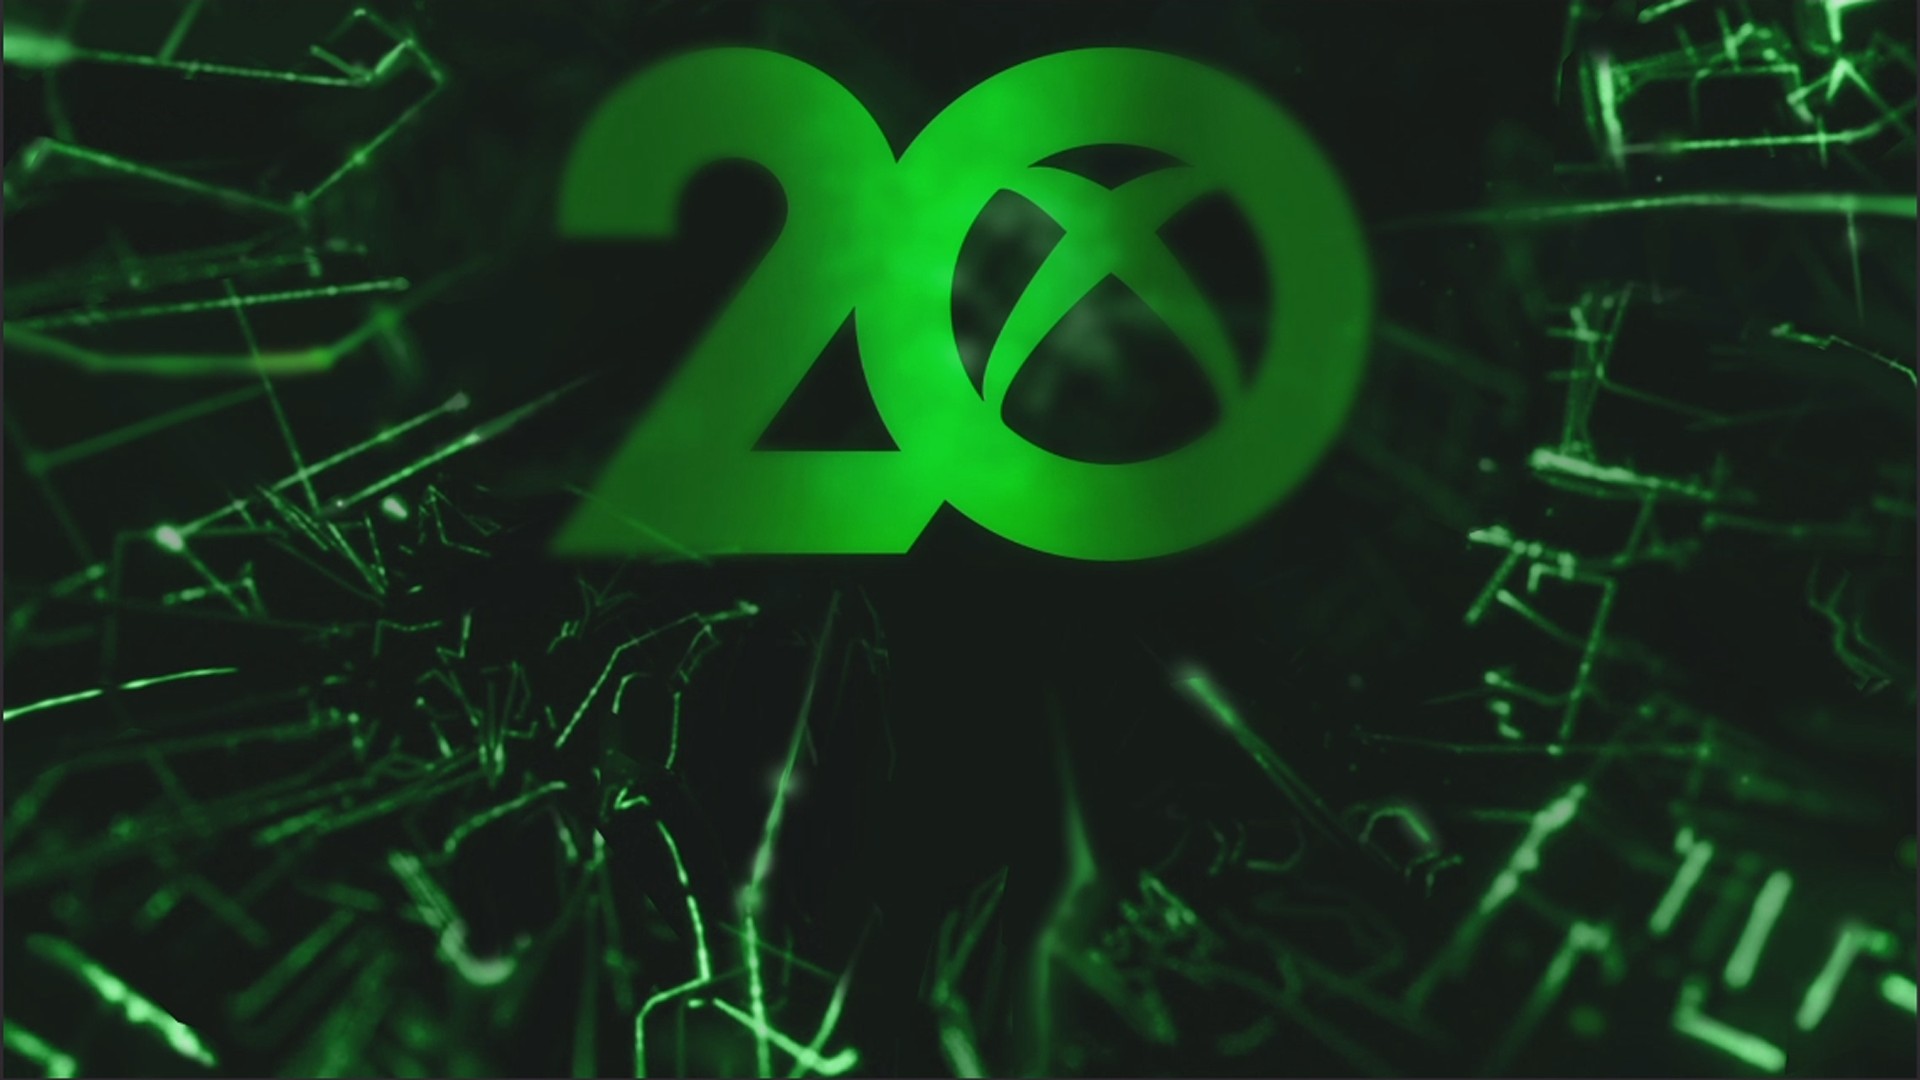 20th Anniversary dynamic background